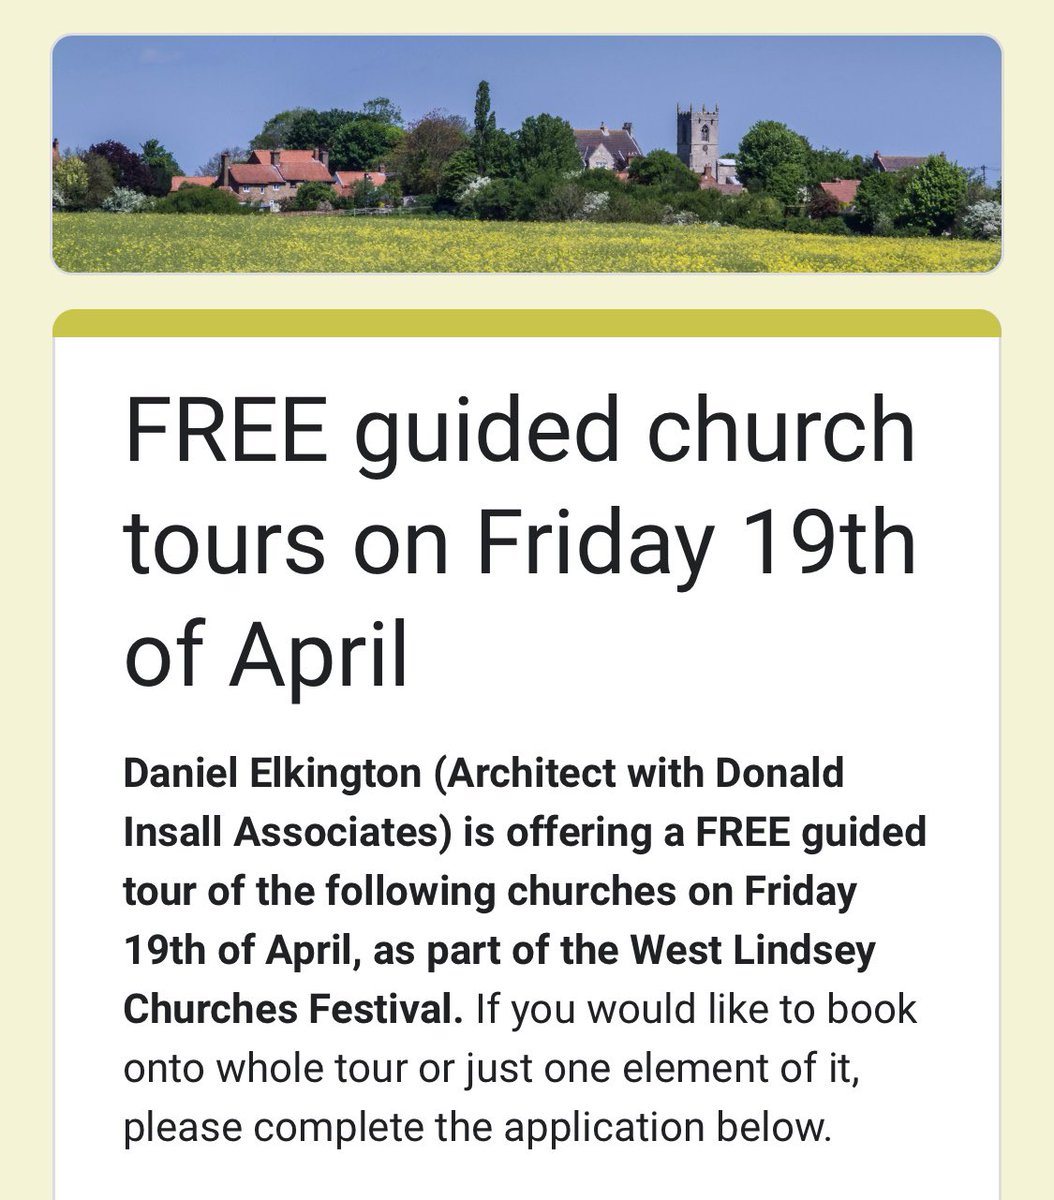 FREE guided church tours on Fri 19 April by Daniel Elkington (Architect, Donald Insall Associates) offered as part of this Festival.  10.00 Corringham 10.45 Laughton 11.30 Coates by Stow 12.15 Stow Minster 1.30 Tour of Stow Minster Click to book here docs.google.com/forms/u/1/d/e/…